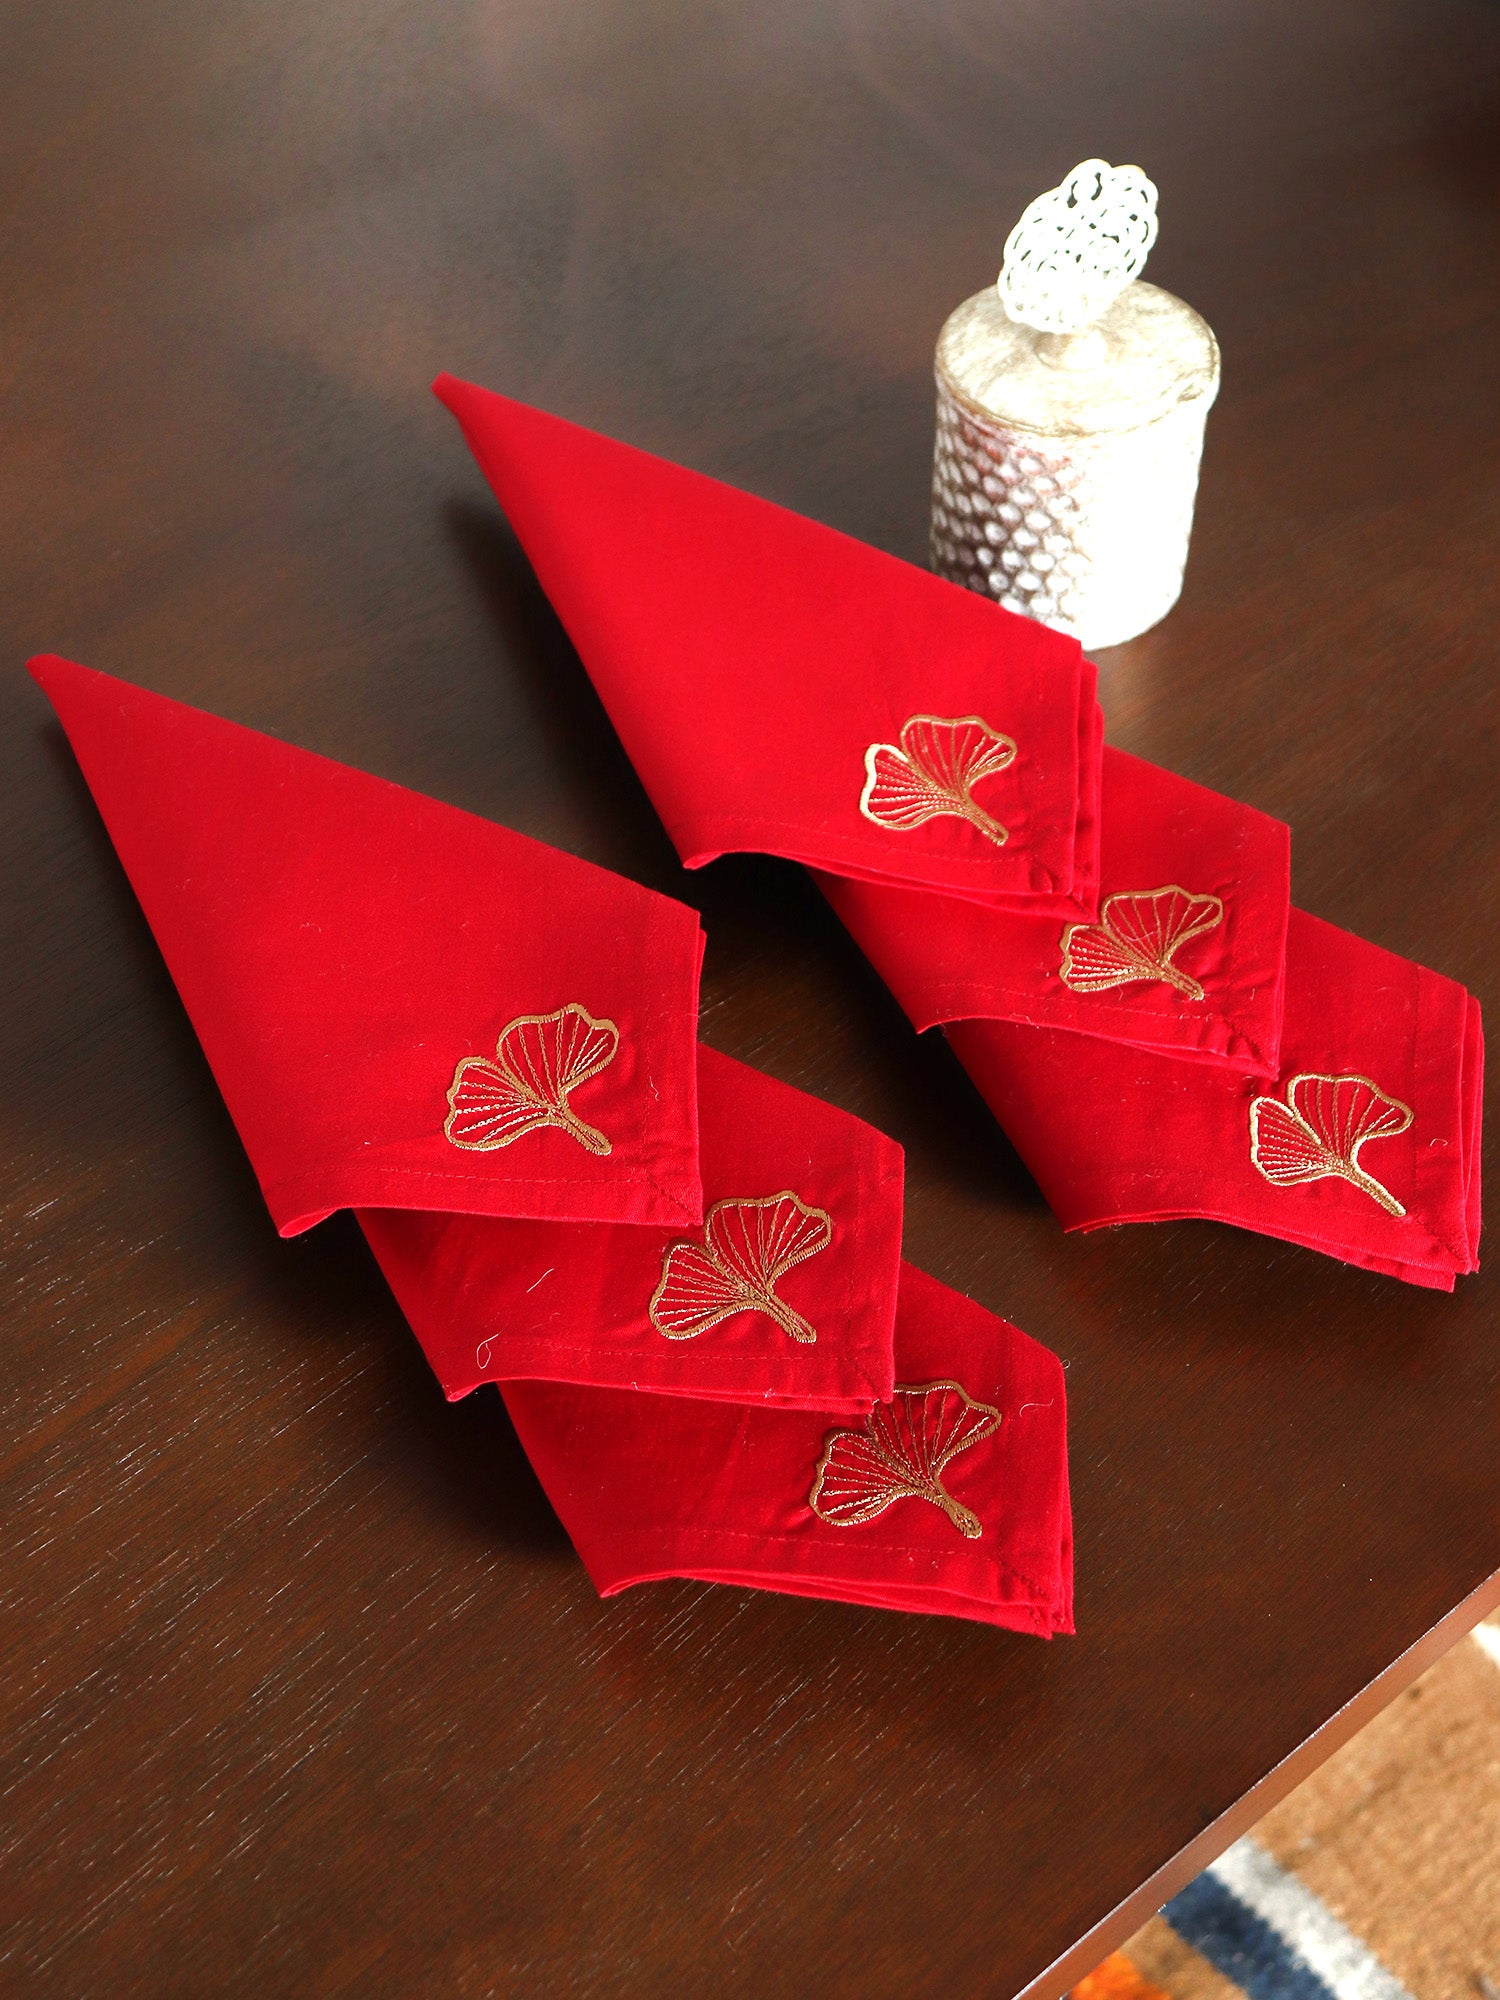 Dinner Napkins Set of 6 Cotton, Leaf Embroidered - Red Gold - 16x16 inches